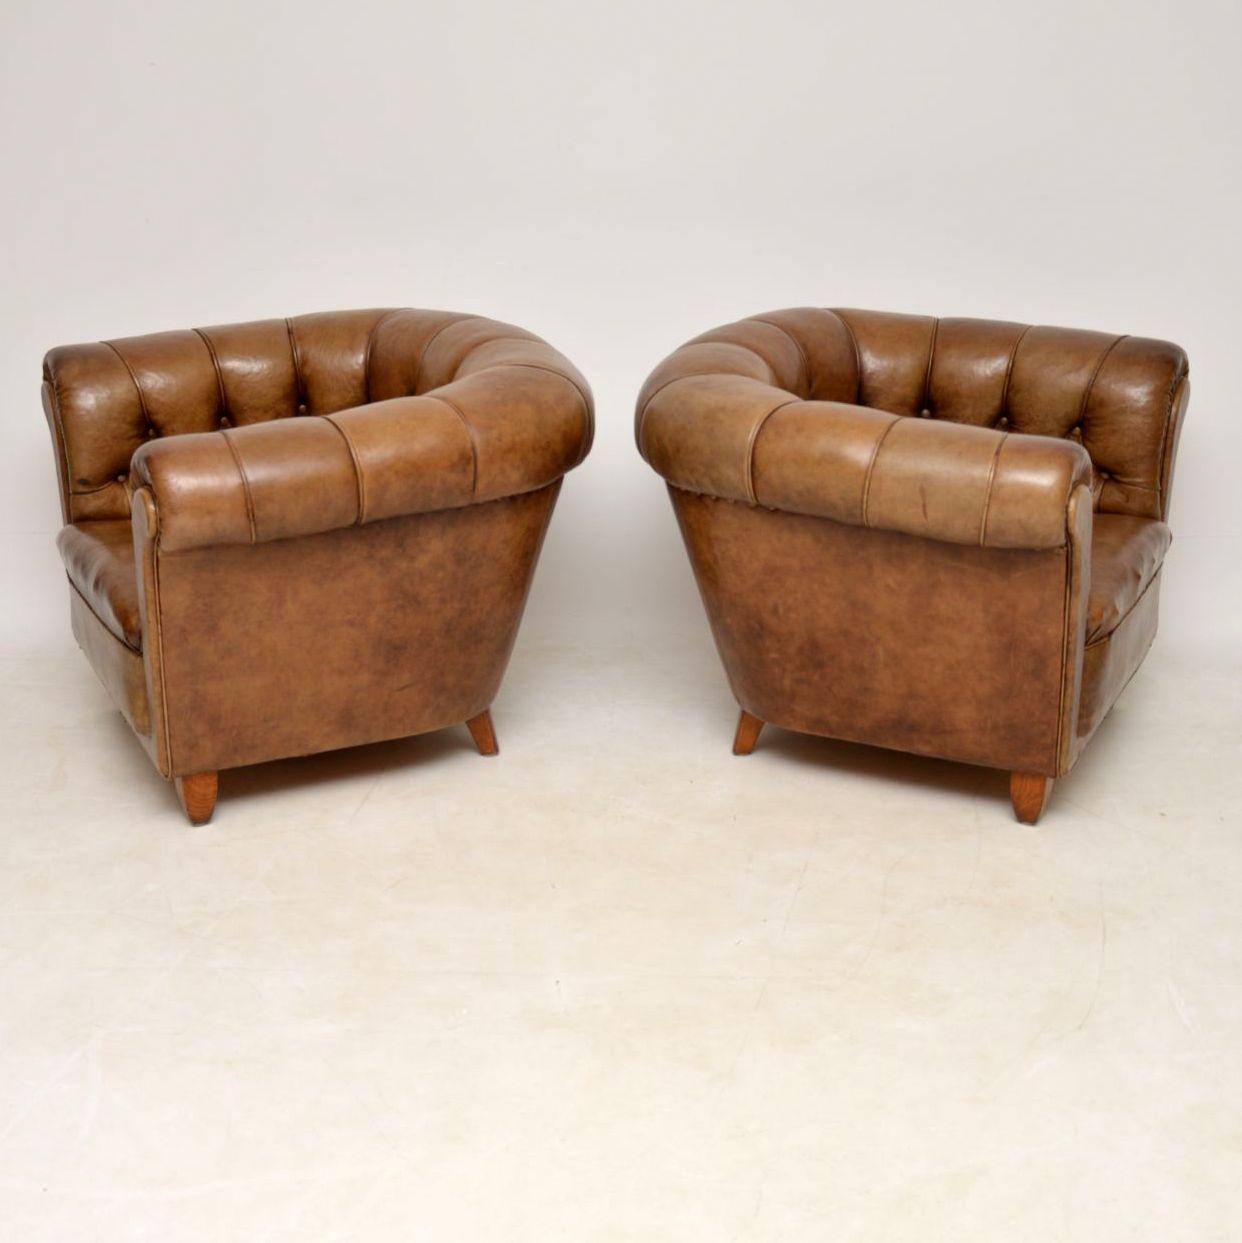  Pair of Antique Swedish Leather Chesterfield Armchairs 4